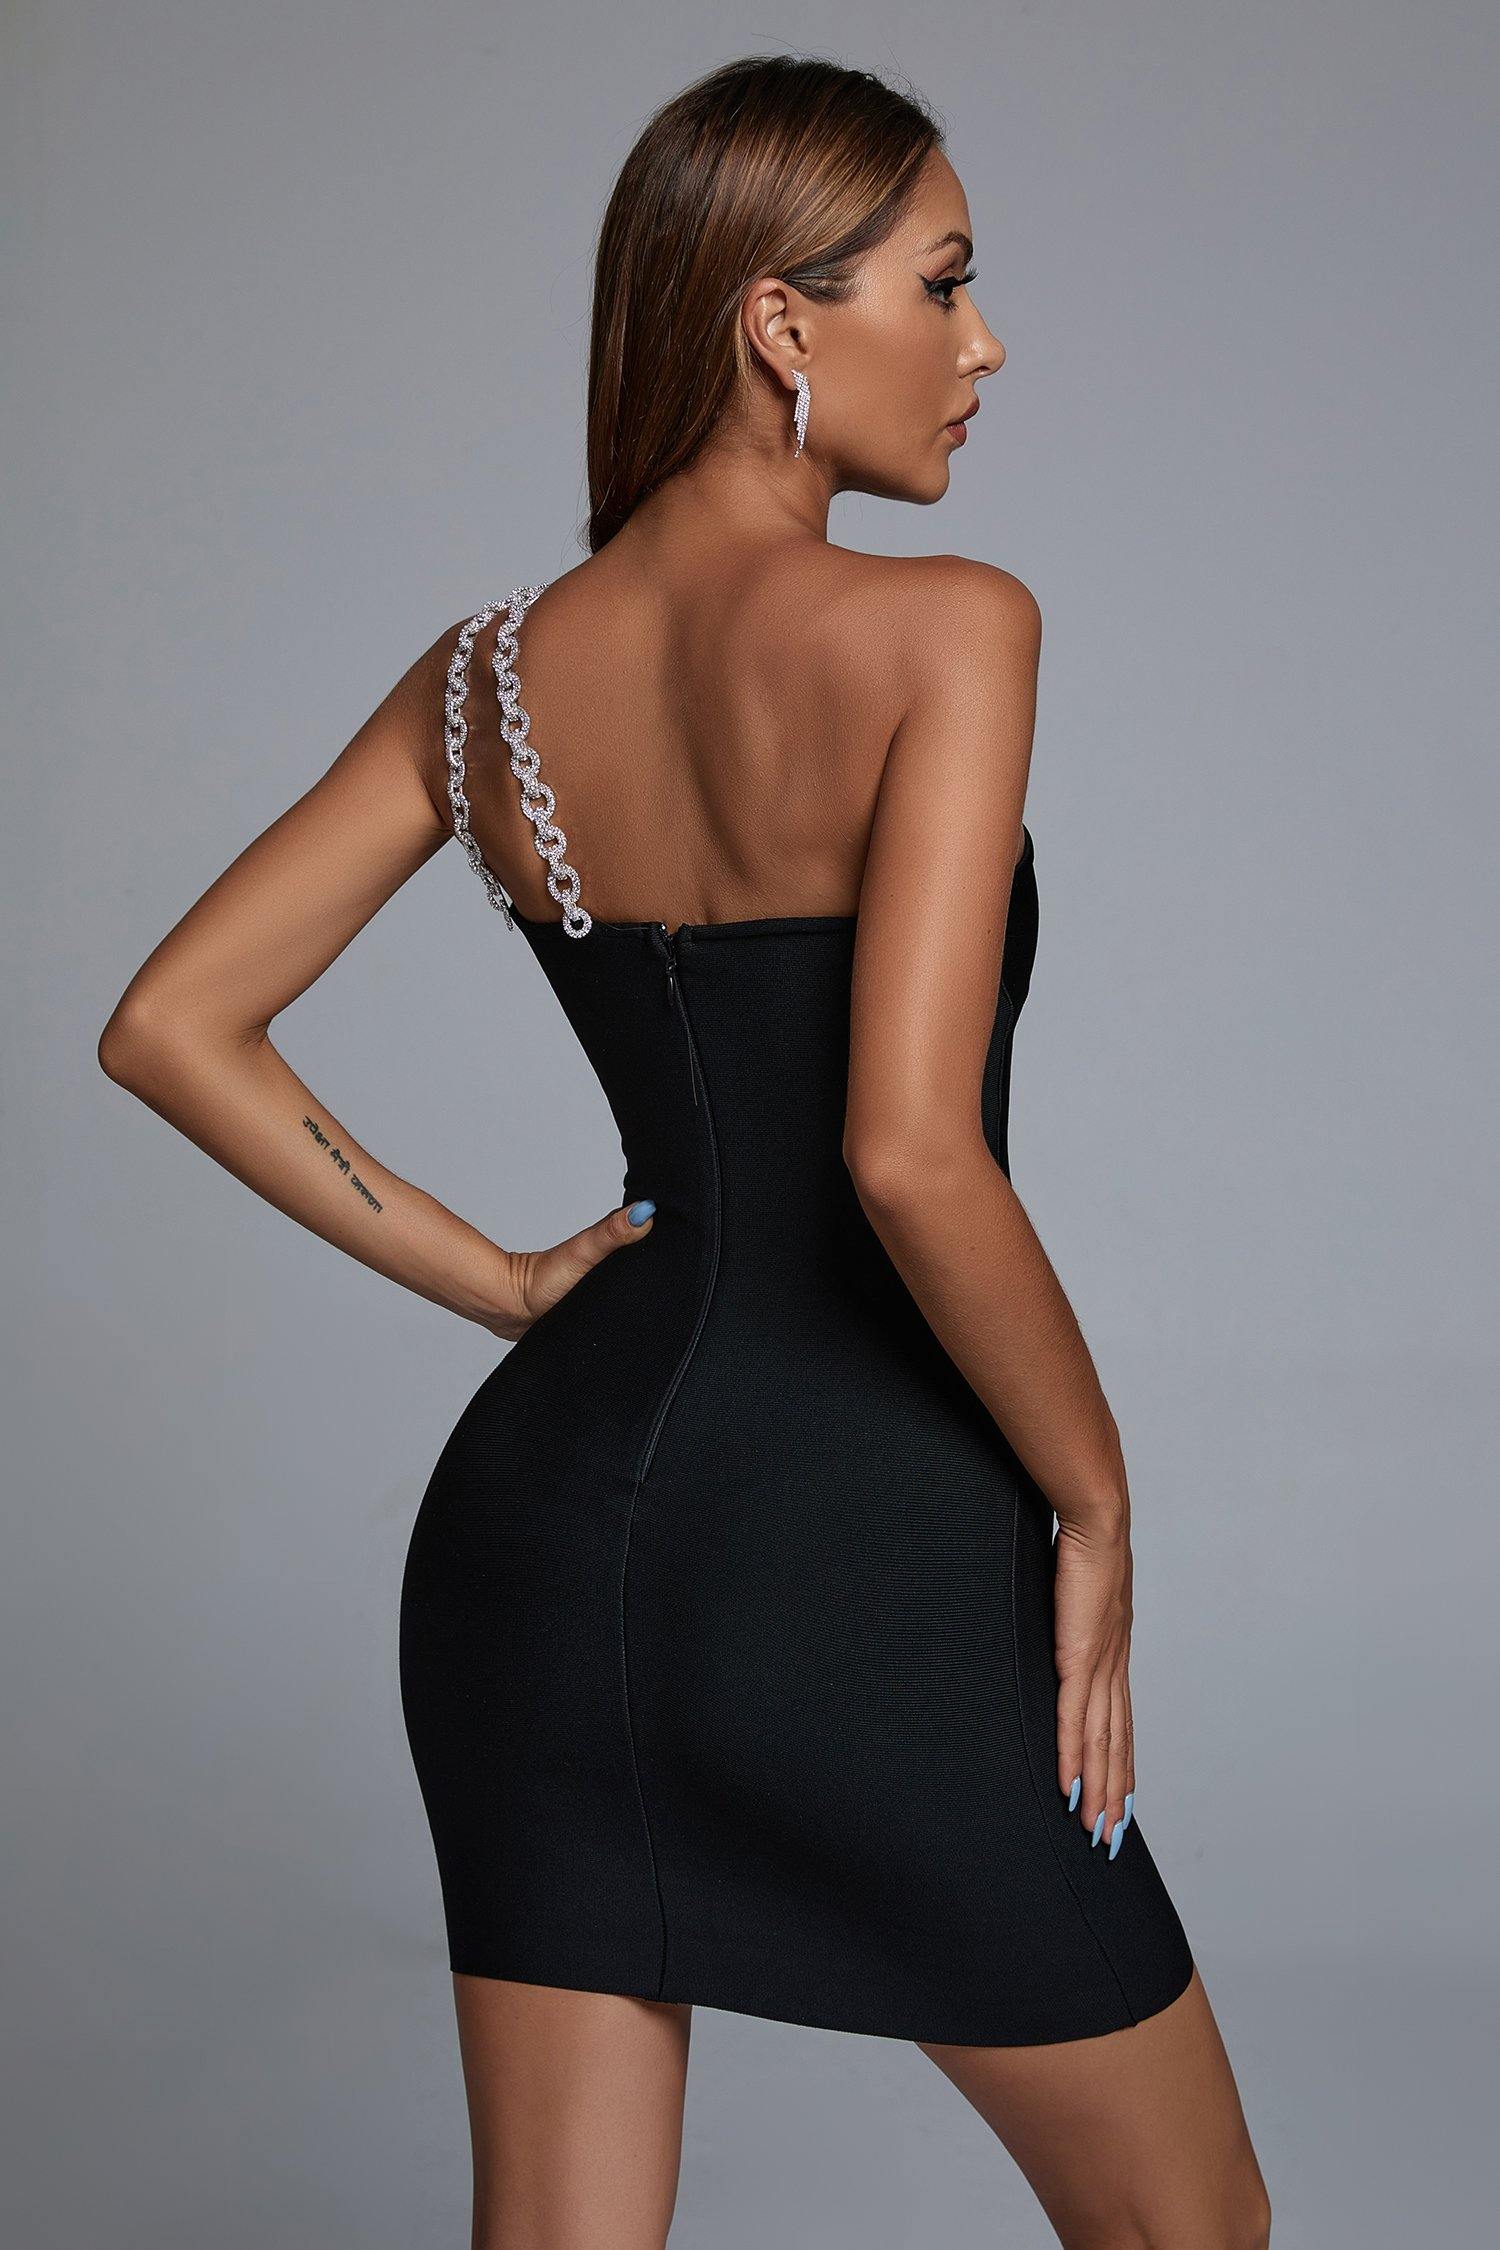 One Shoulder Sleeveless Cut Out Chain Mini Cocktail Dress